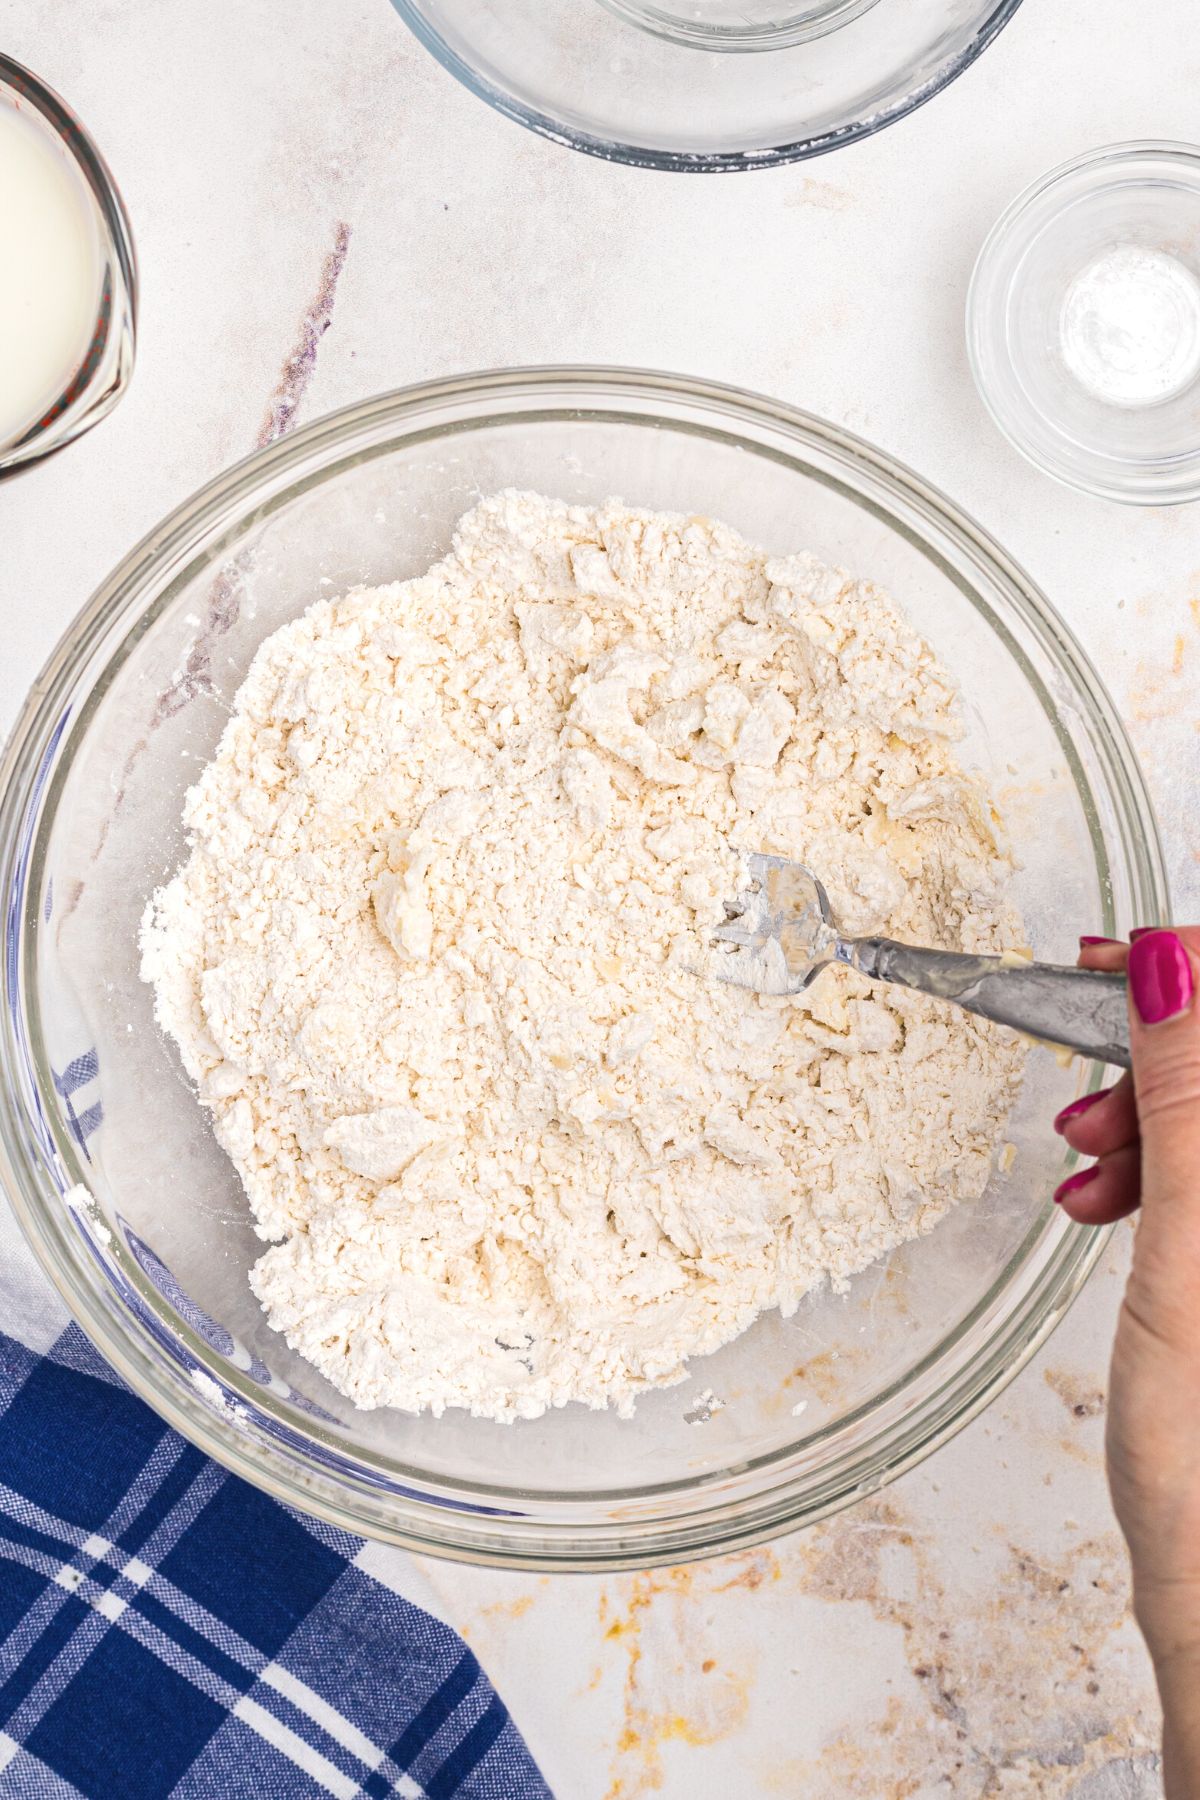 Flour and other dry ingredients mixed with butter in a clear glass bowl.